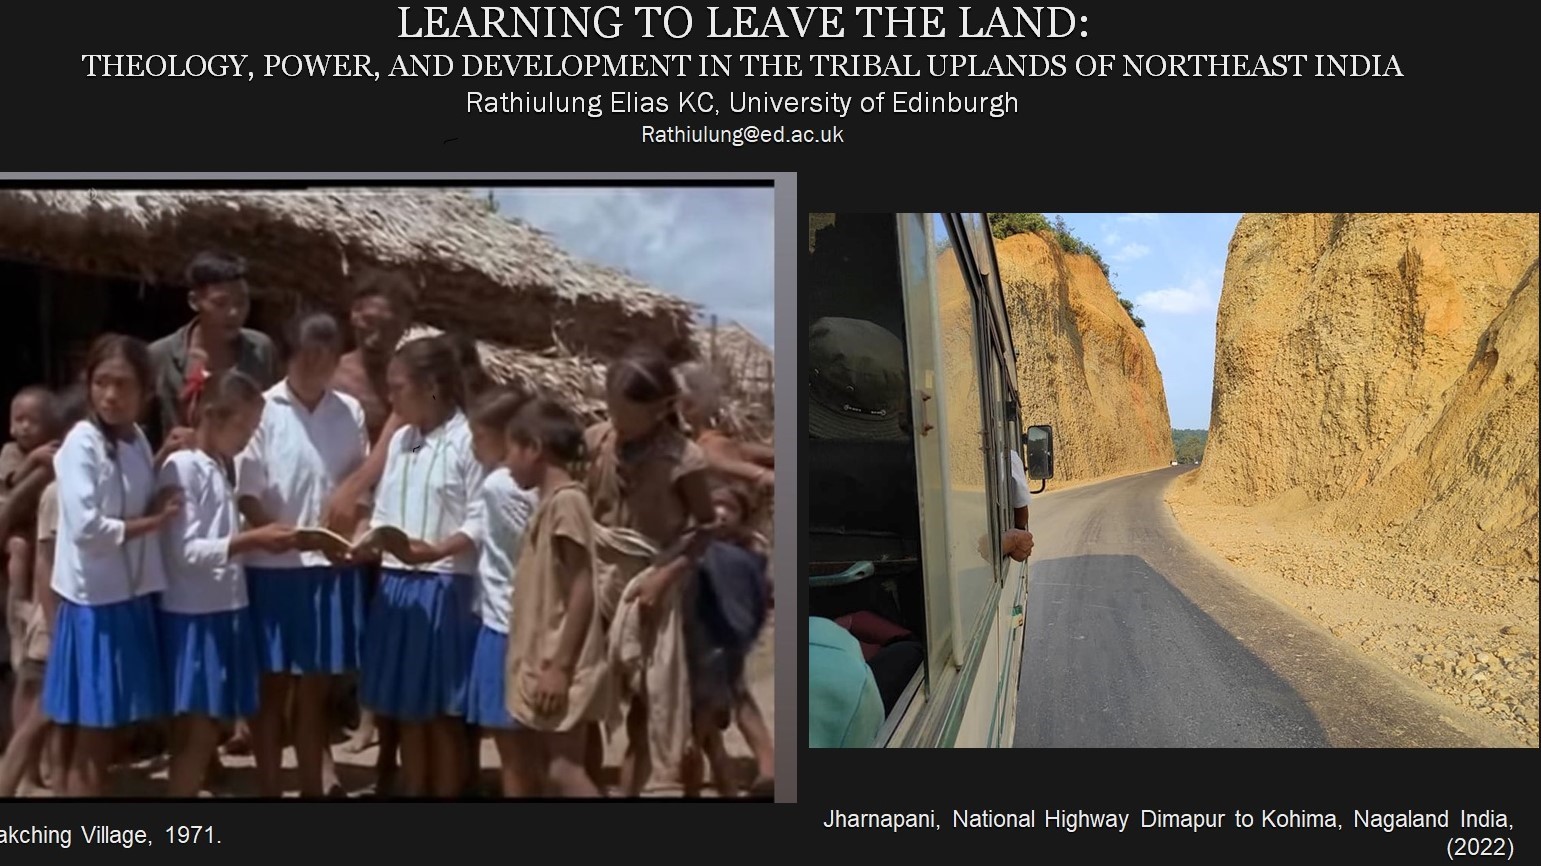 SST Power 2023: “Learning to leave the land: Theology, Power, and Development in the Tribal uplands of Northeast India”